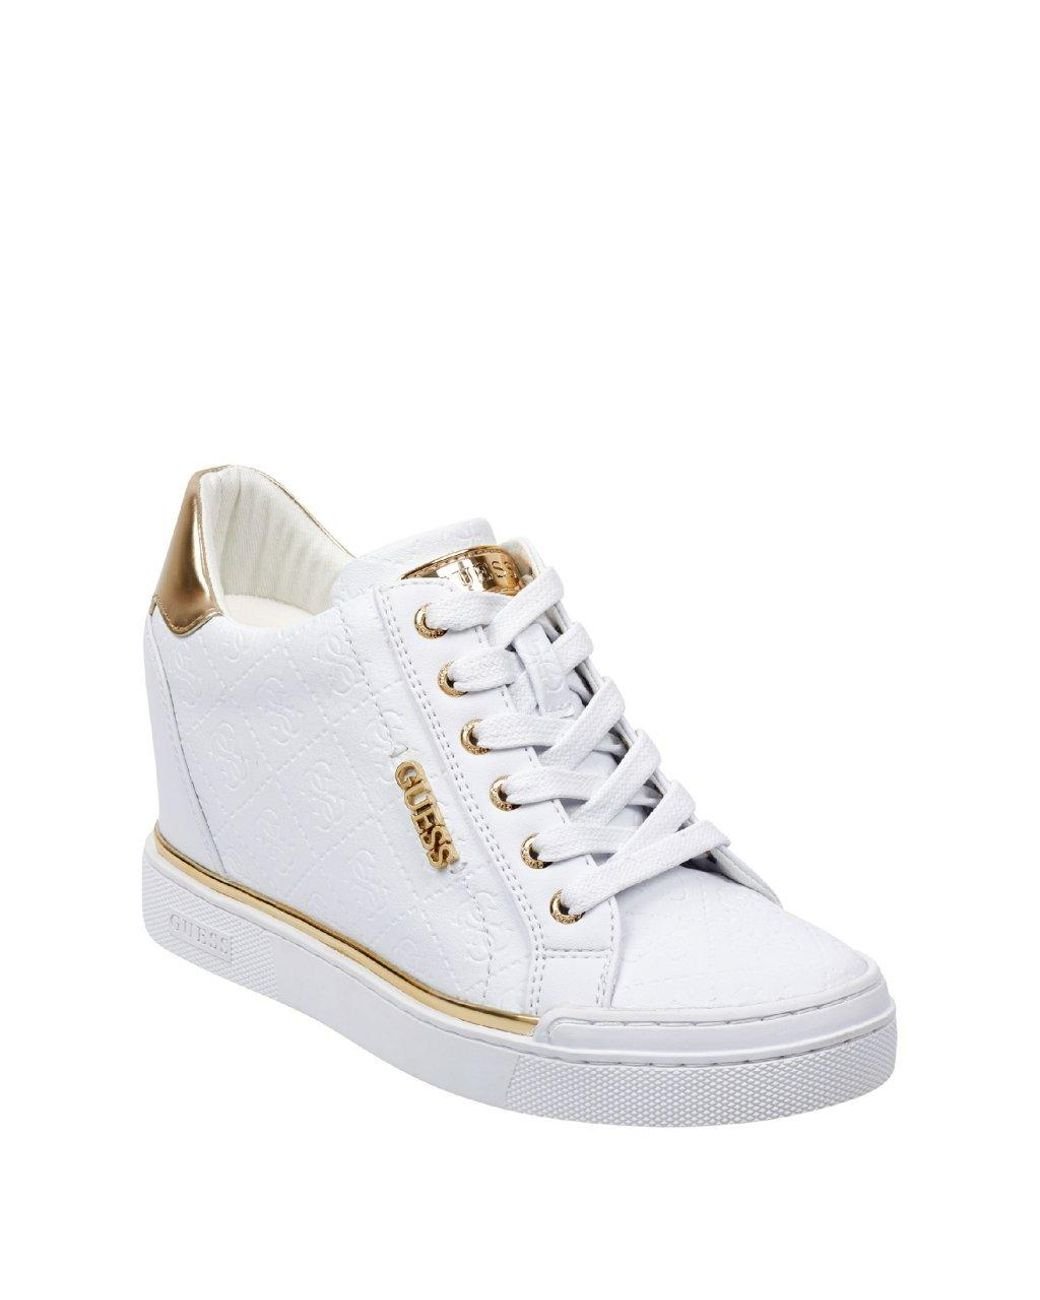 Guess Flowurs Wedge Sneakers in White | Lyst Canada